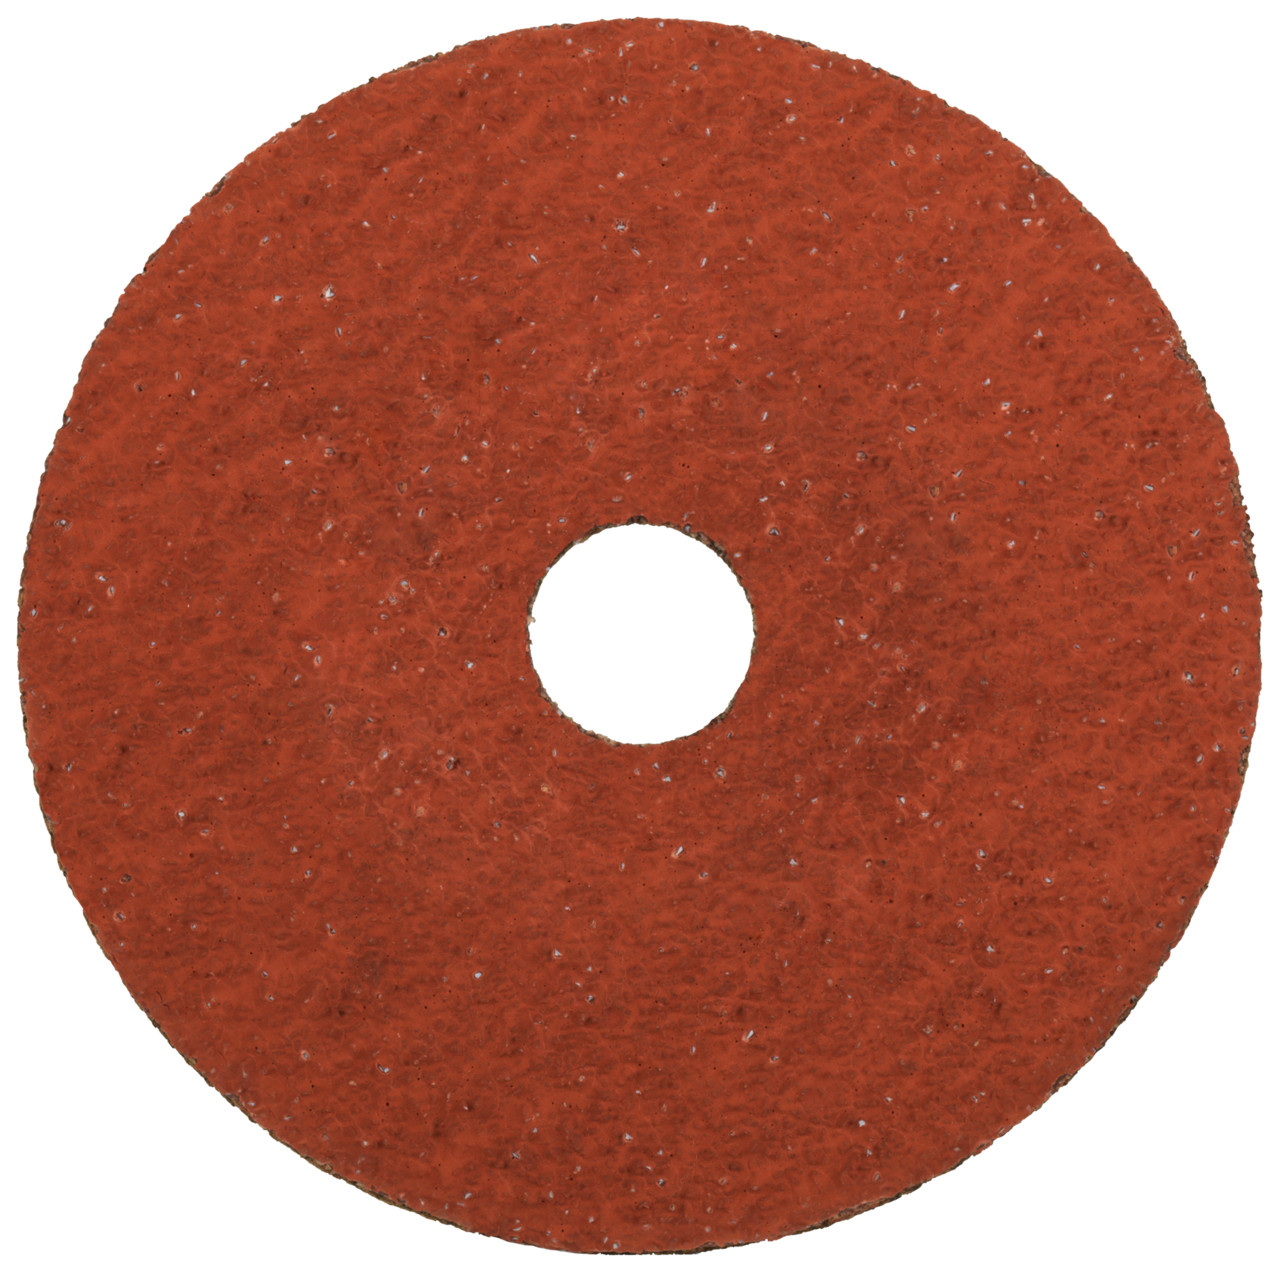 Tyrolit CA-PA93 N NATURAL FIBRE DISC DxH 125x22 For steel and stainless steel, P36, form: DISC, Art. 712268